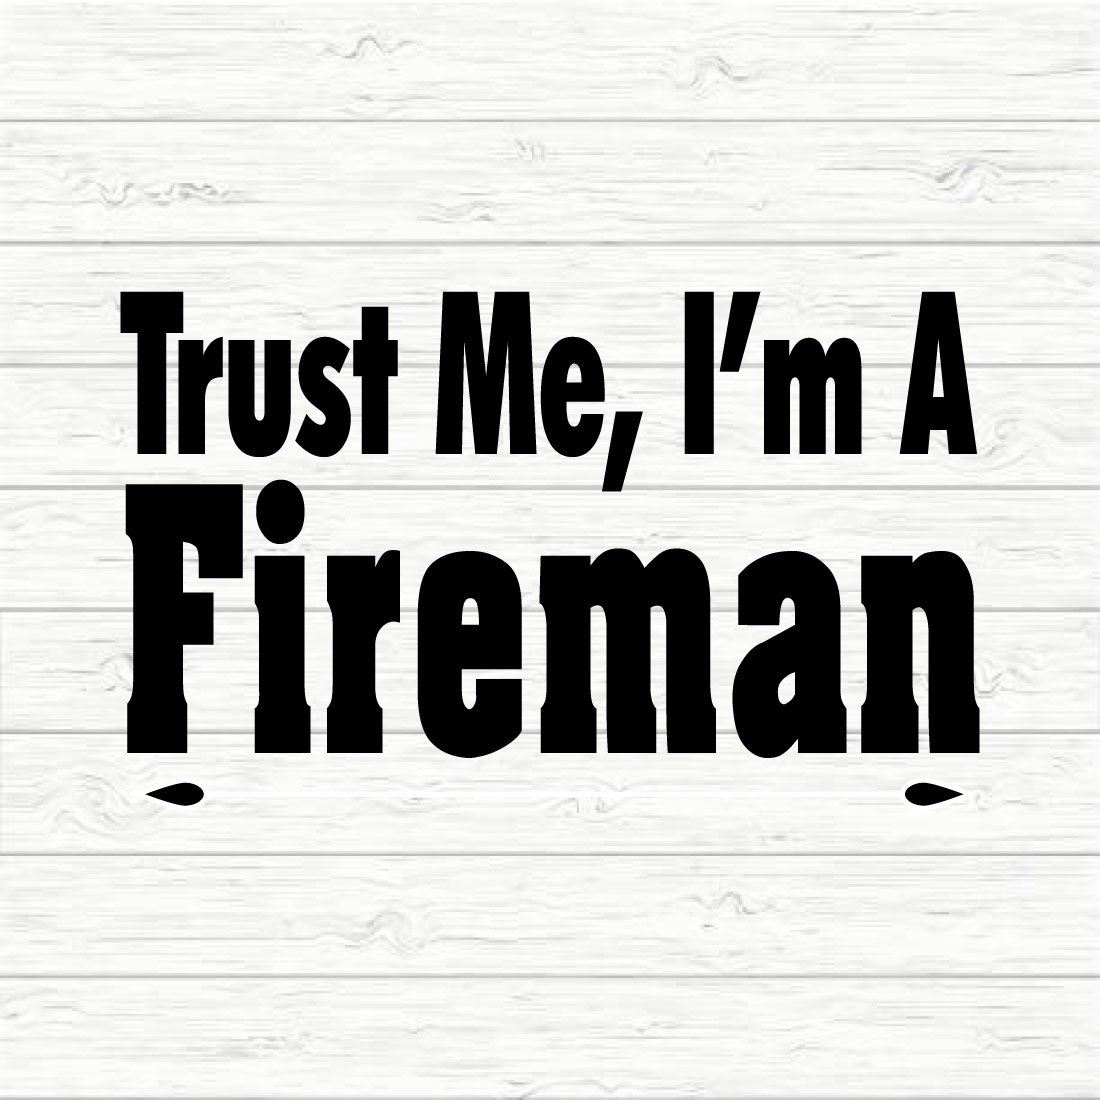 Trust Me I'm A Fireman preview image.